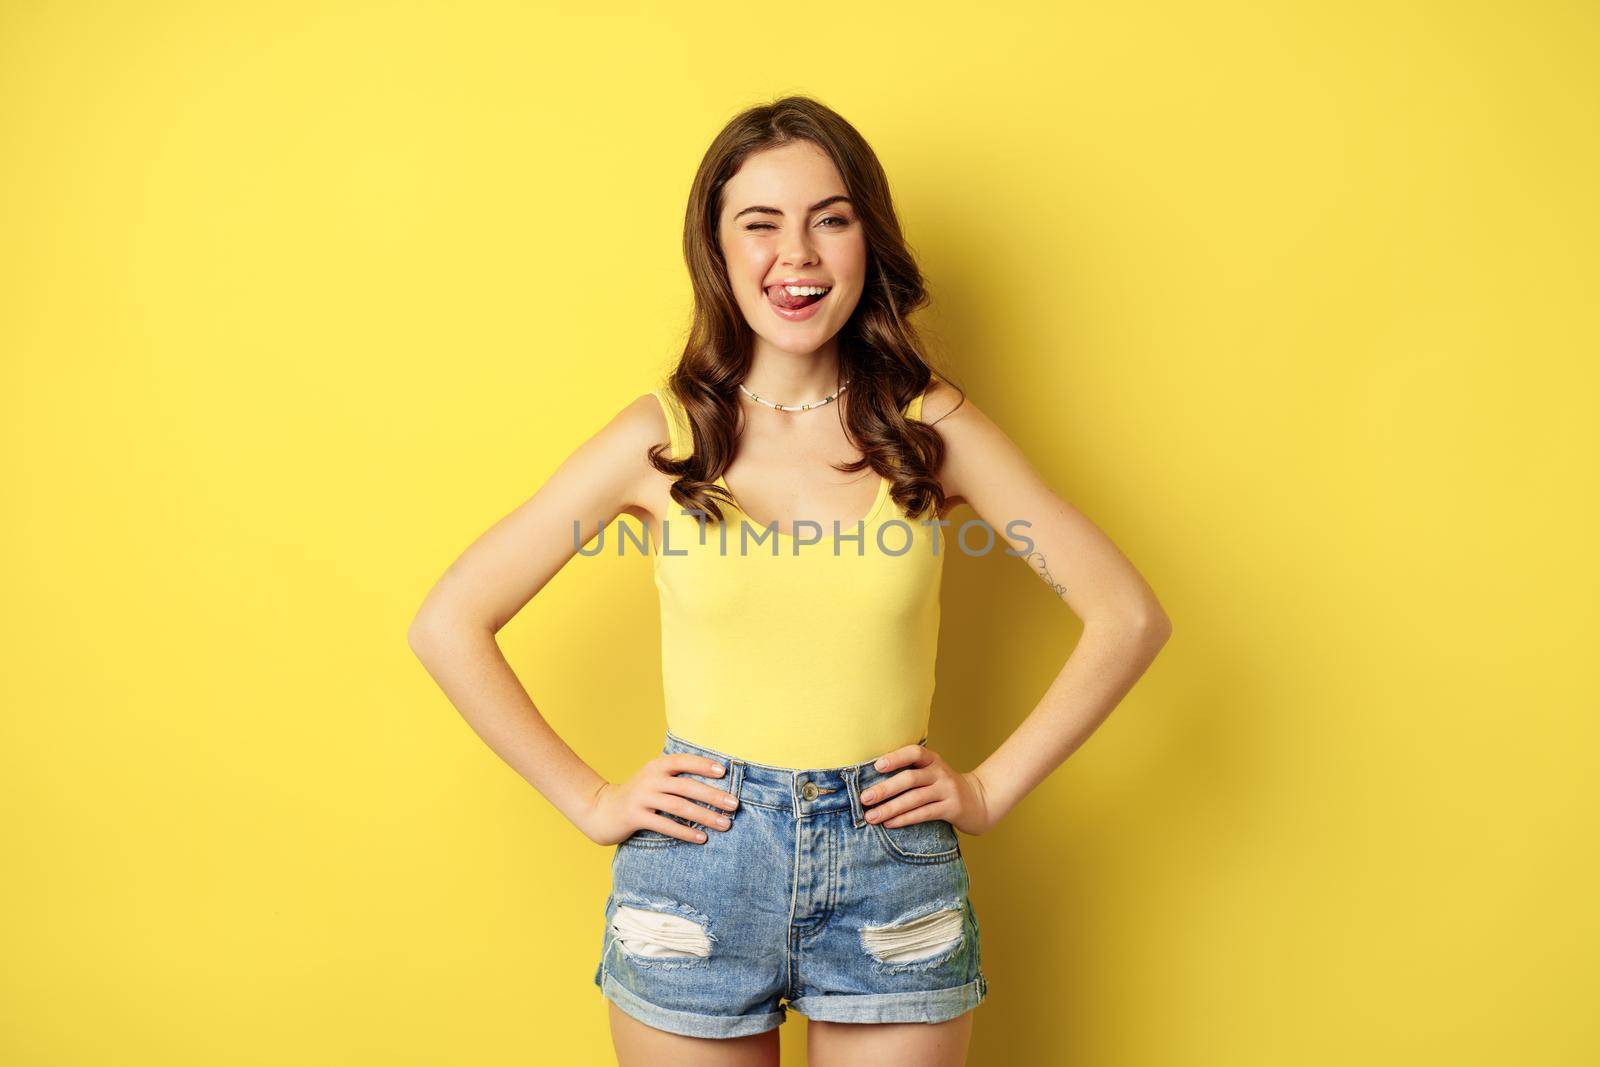 Stylish young brunette woman showing her white healthy teeth, smiling and showing tongue, winking enthusiastic, standing over yellow background.